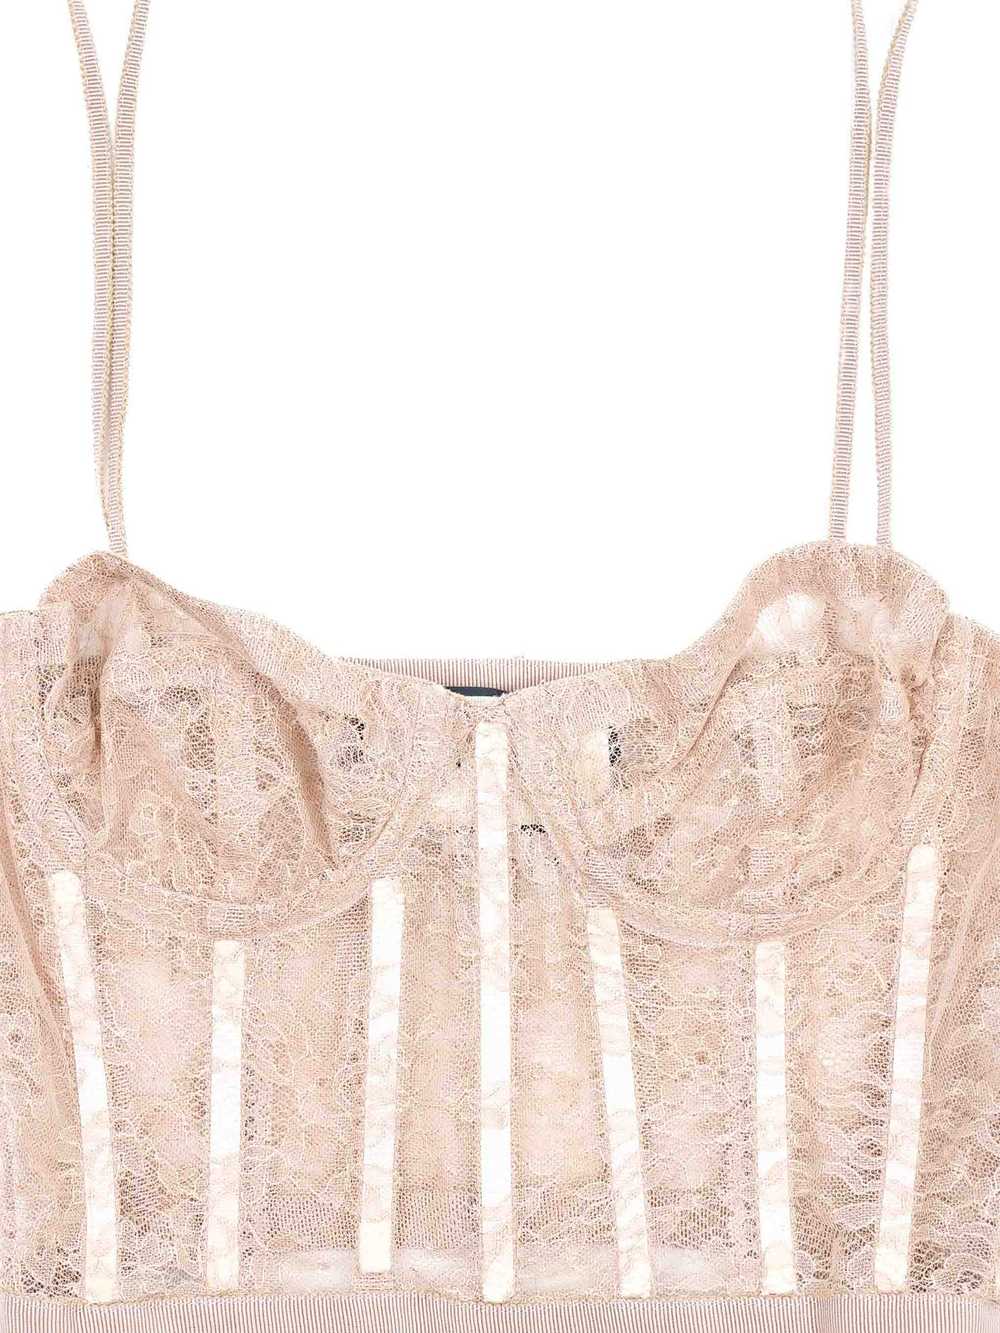 Gucci Nude Lace Bustier - image 2